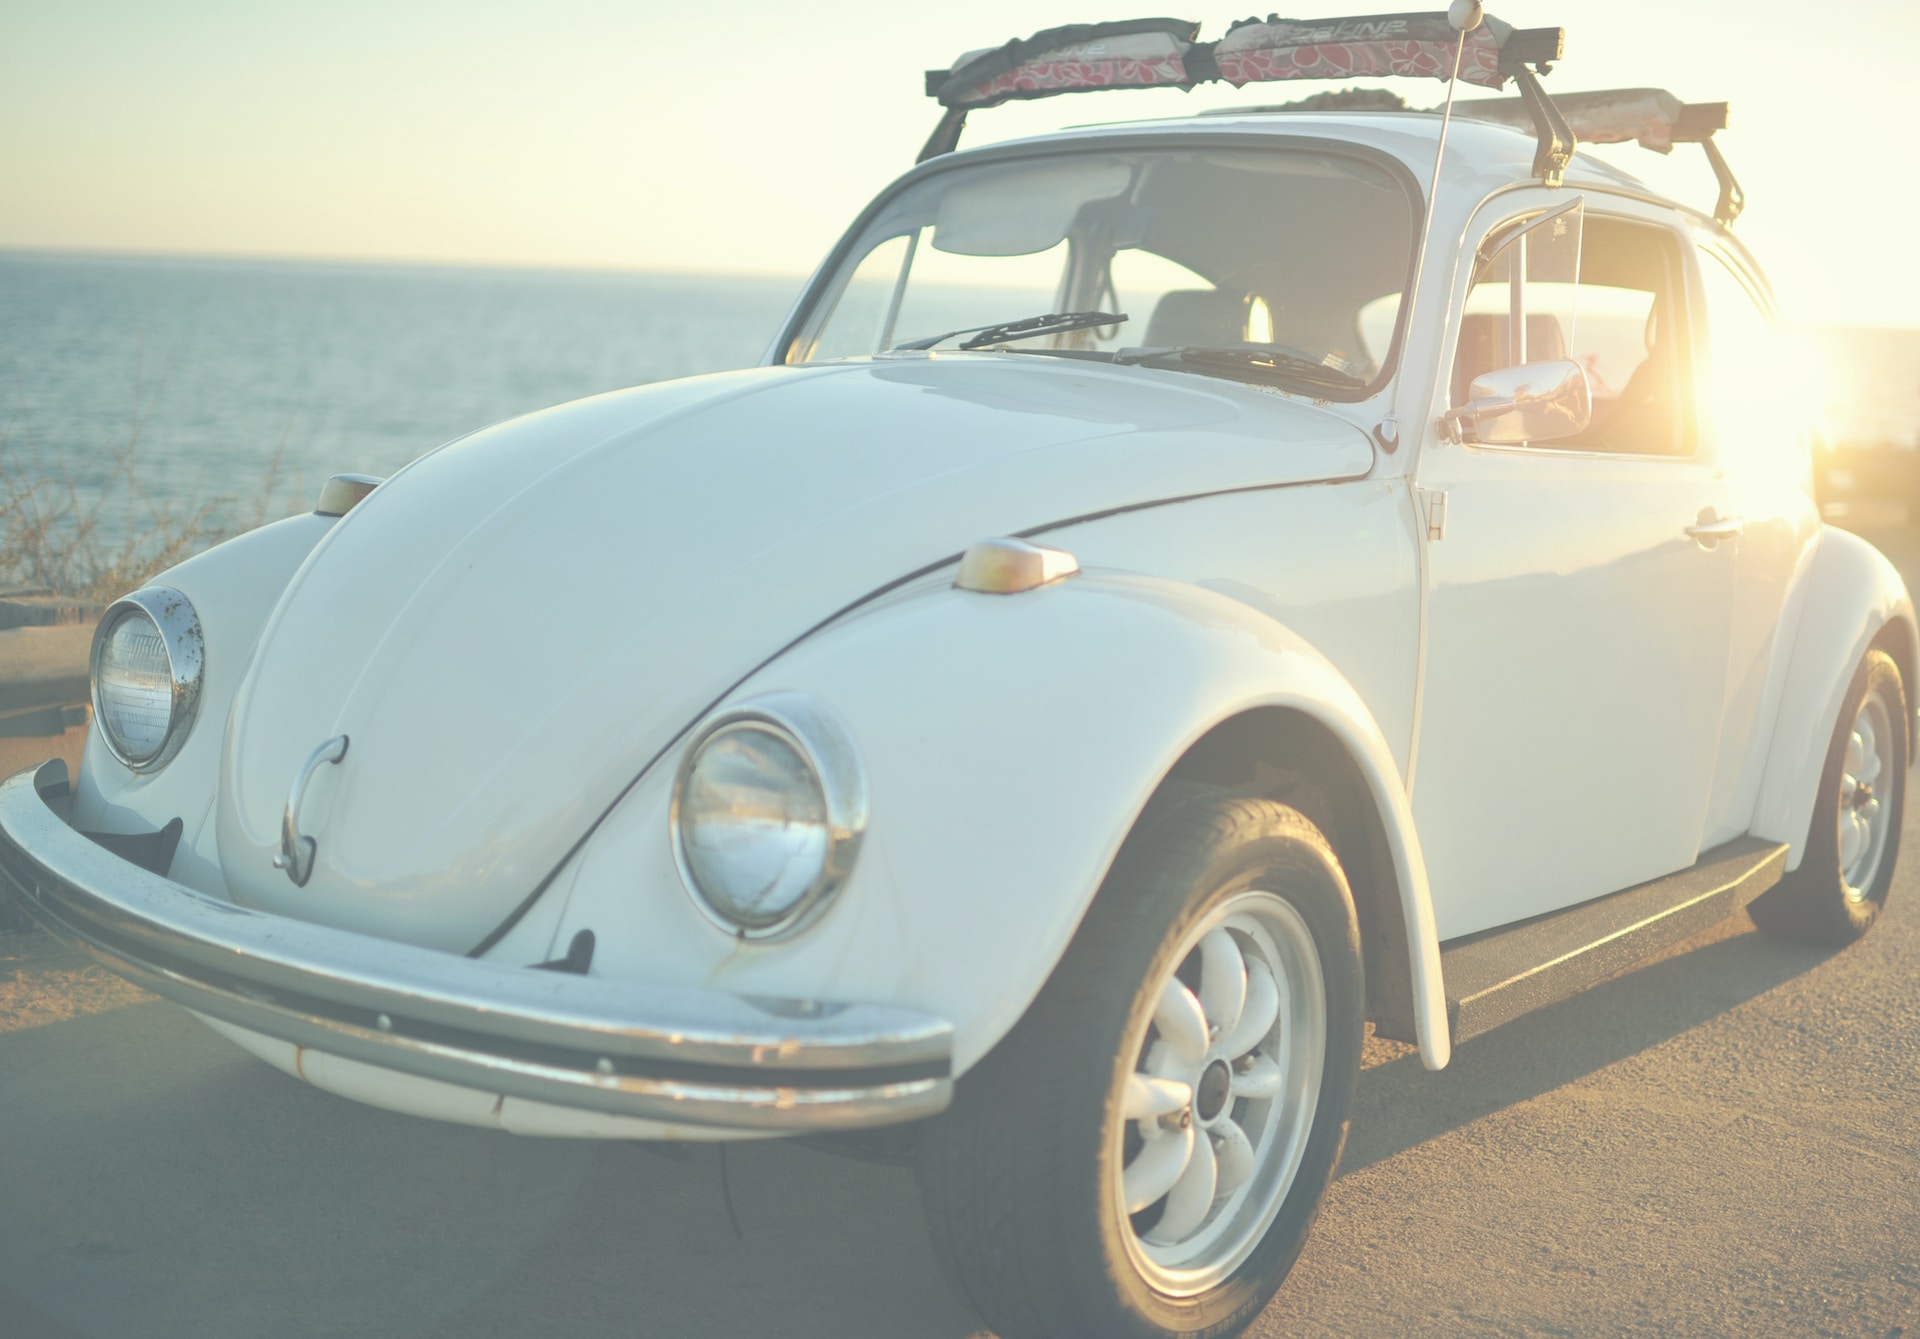 a Picture of a vintage white Volkswagen  Beetle driving.